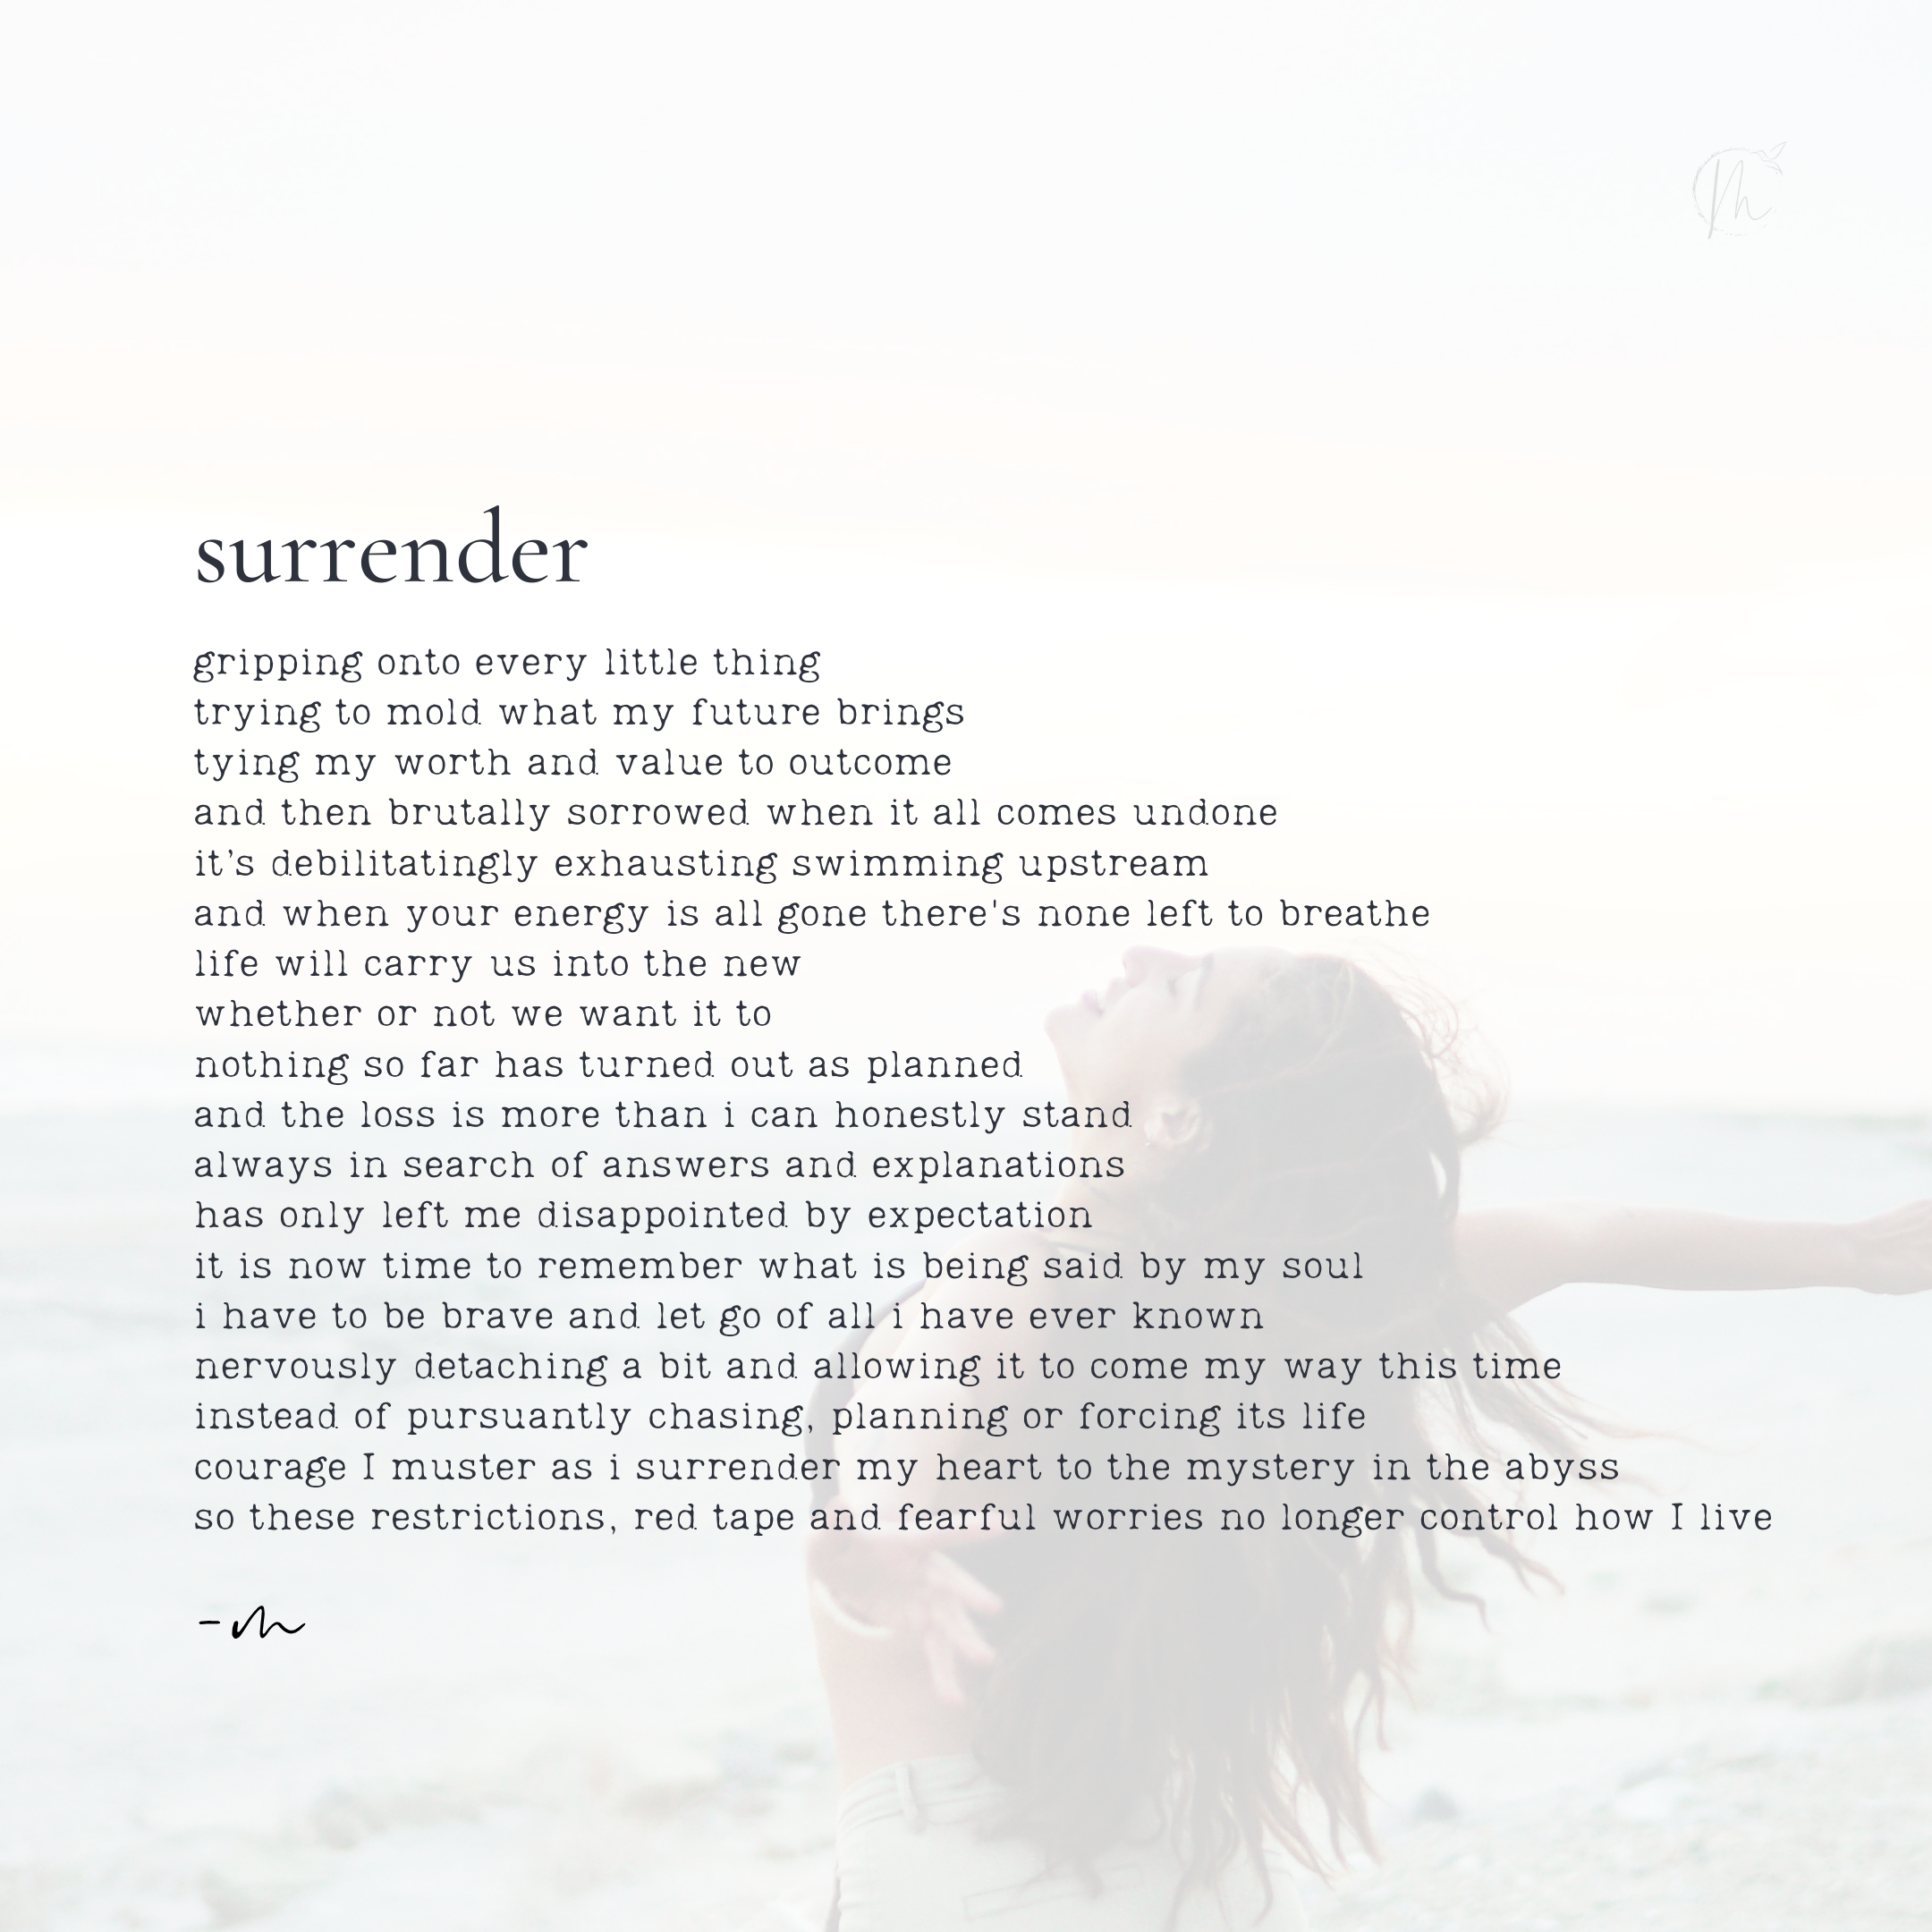 poem - surrender with photo.png